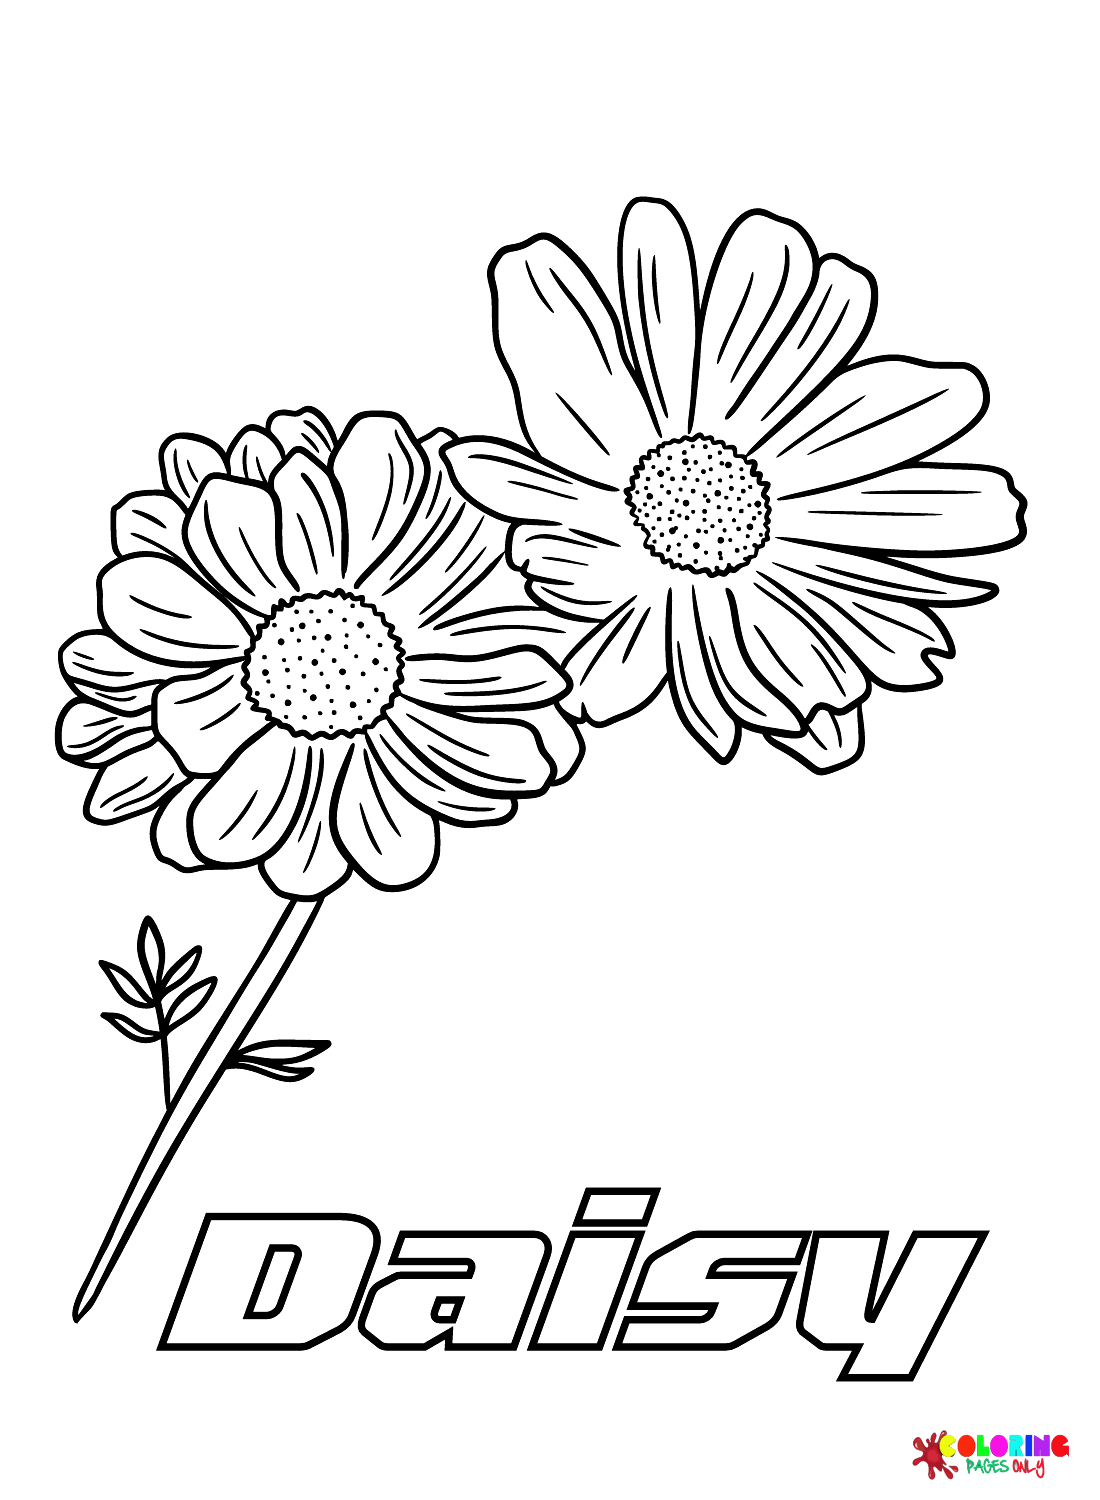 Daisy Flowers For Kids Coloring Page